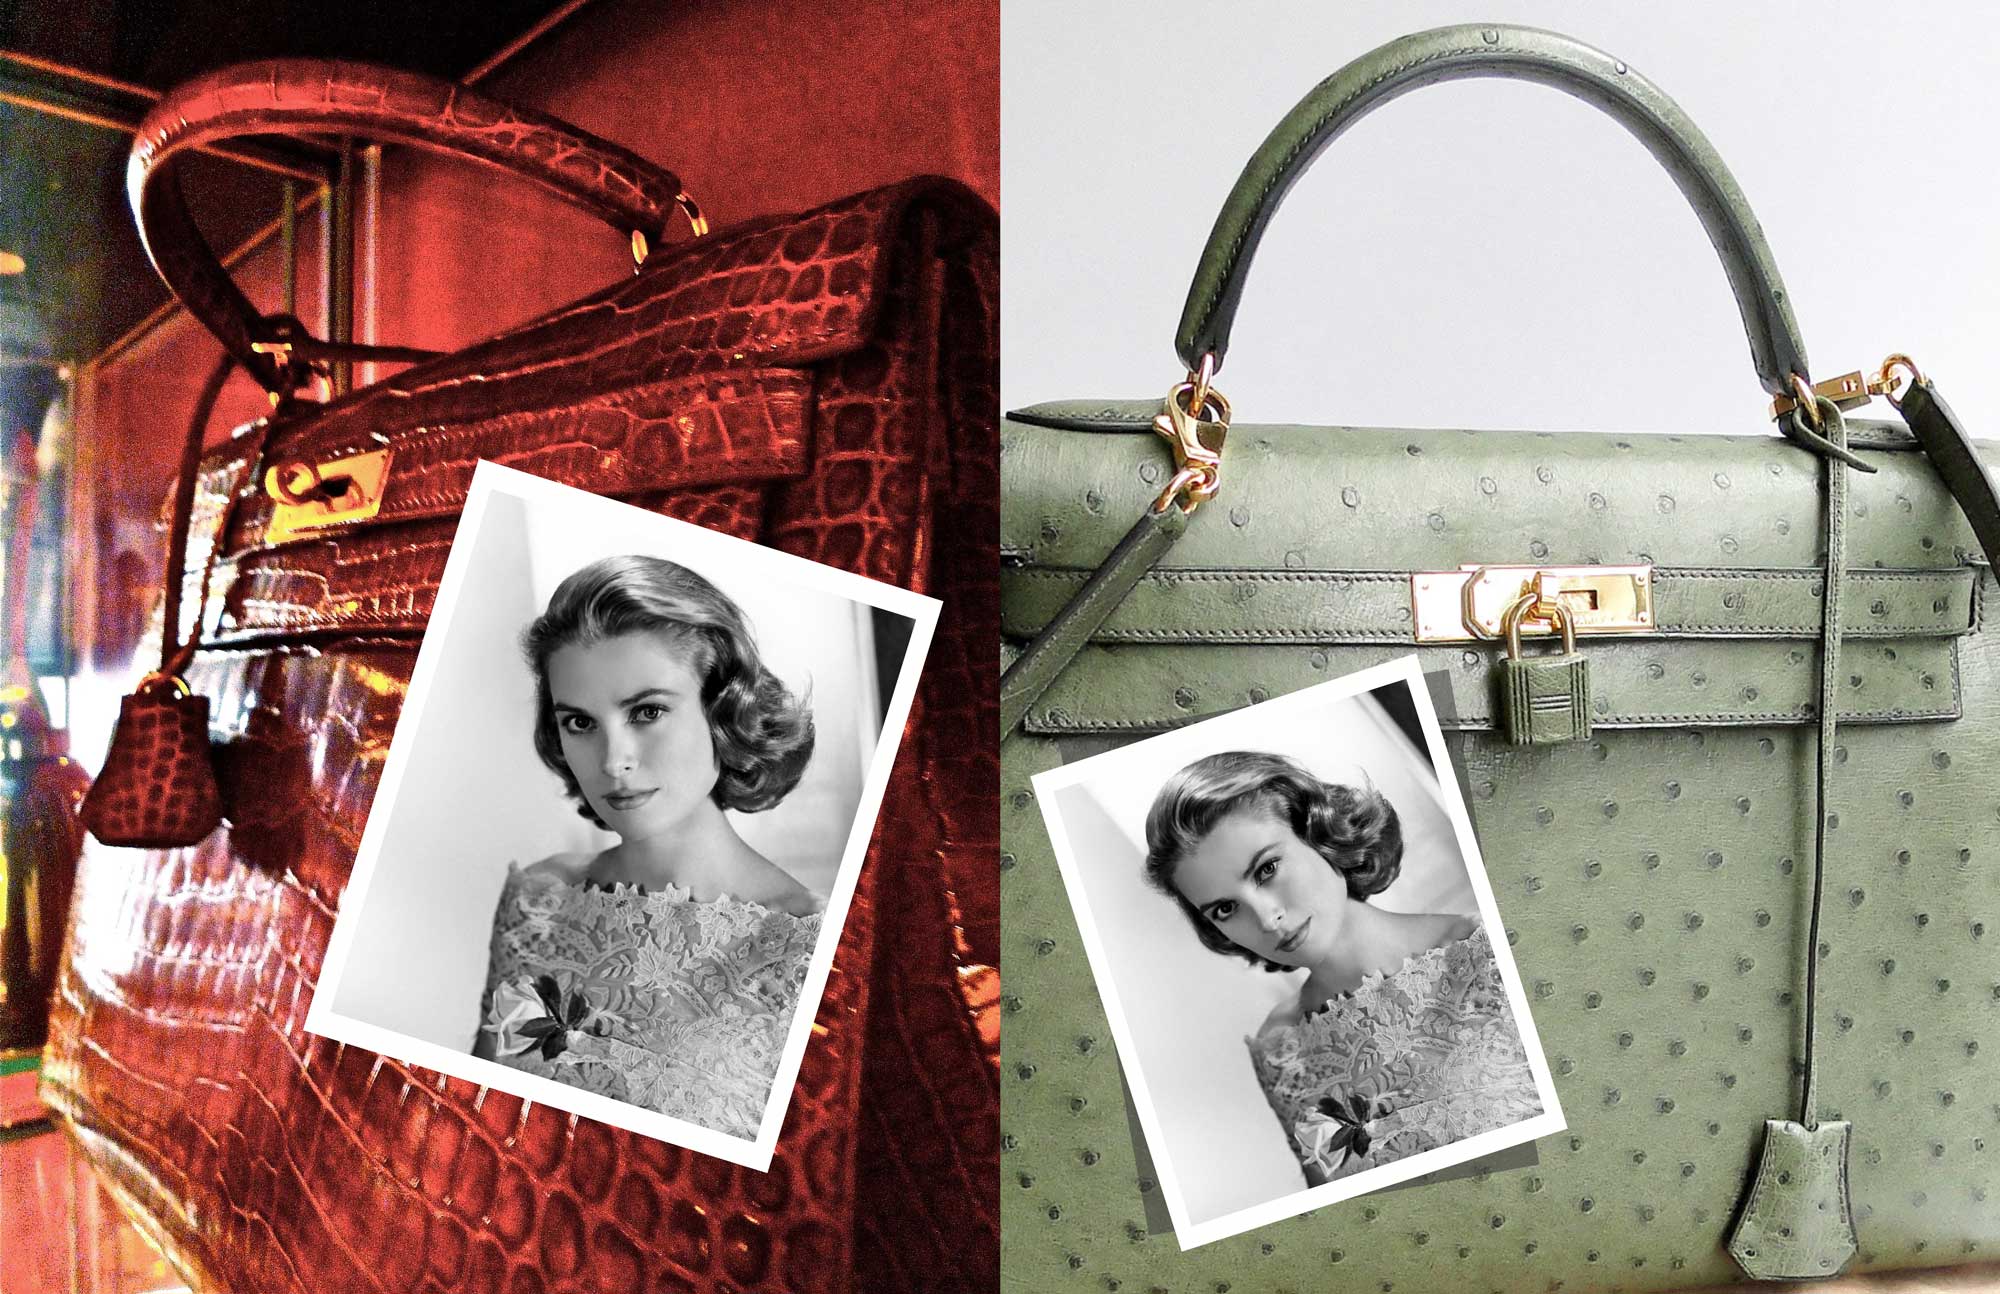 Why this iconic Gucci handbag is a testament to everlasting style